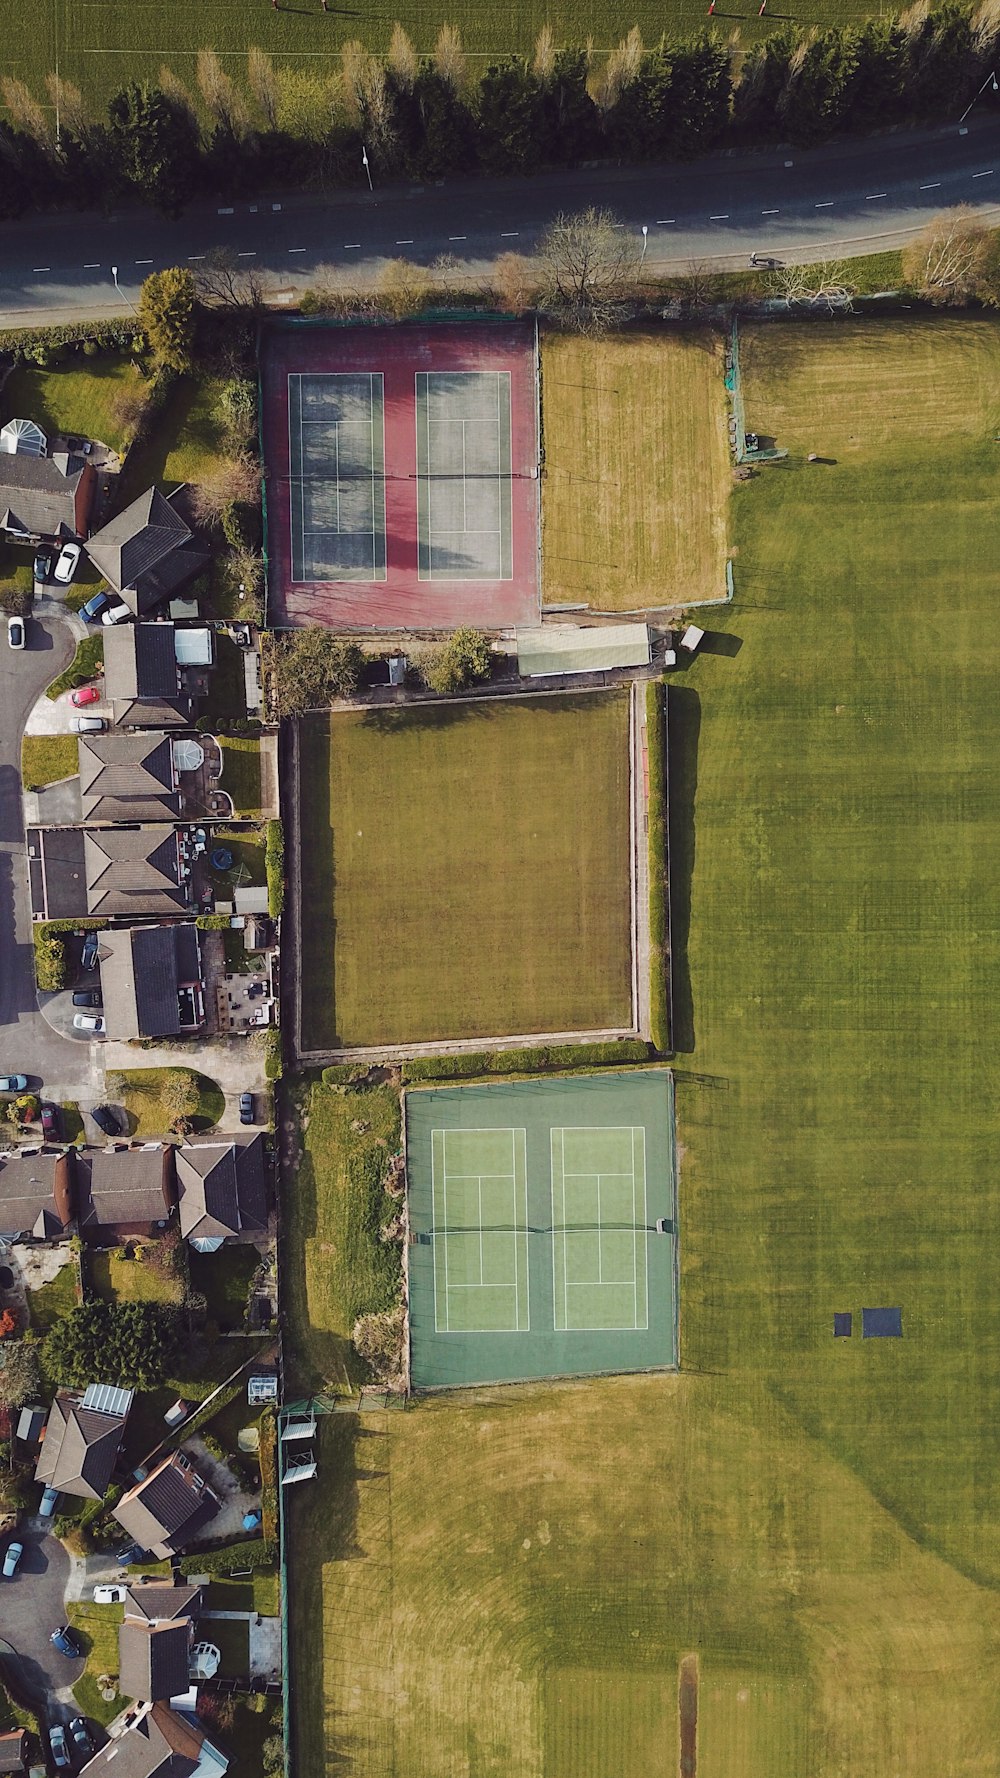 aerial view of green grass field